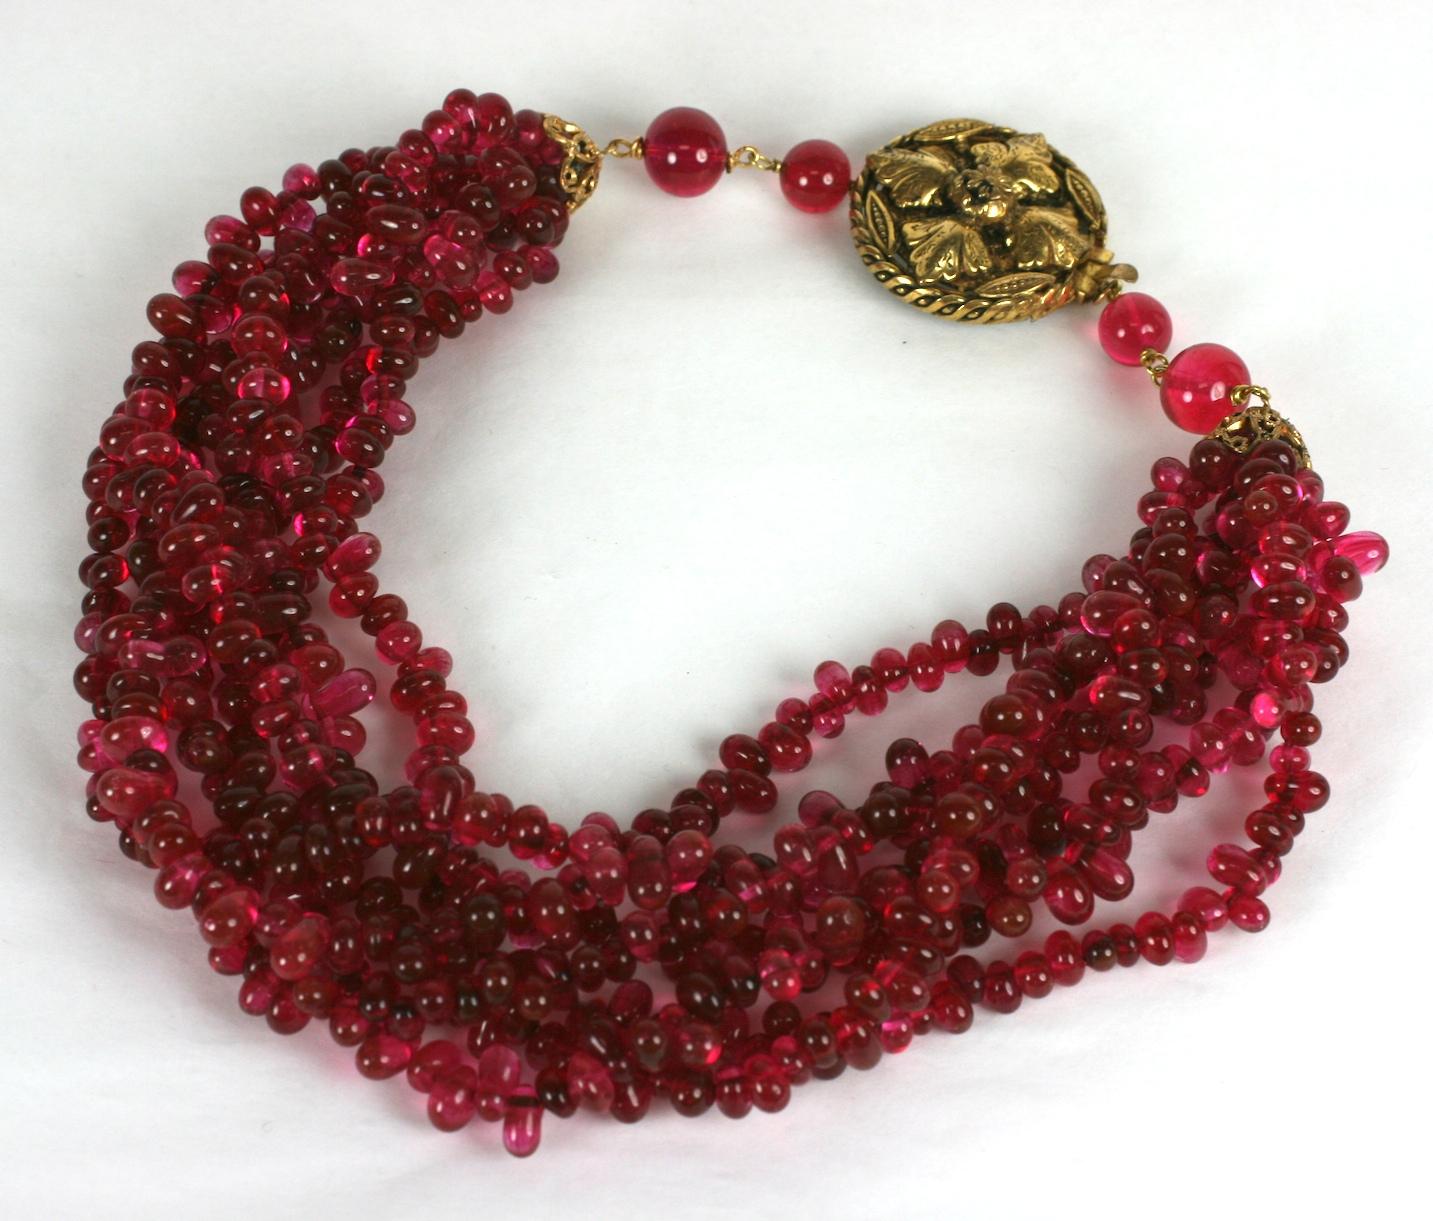 Rare Karl Lagerfeld for Chanel 1983 Indian pink ruby pate de verre torsade necklace from his first collection for Chanel. 7 strands of vari sized and shaped hand made Maison Gripoix beads with ornate bronze clasp.
17